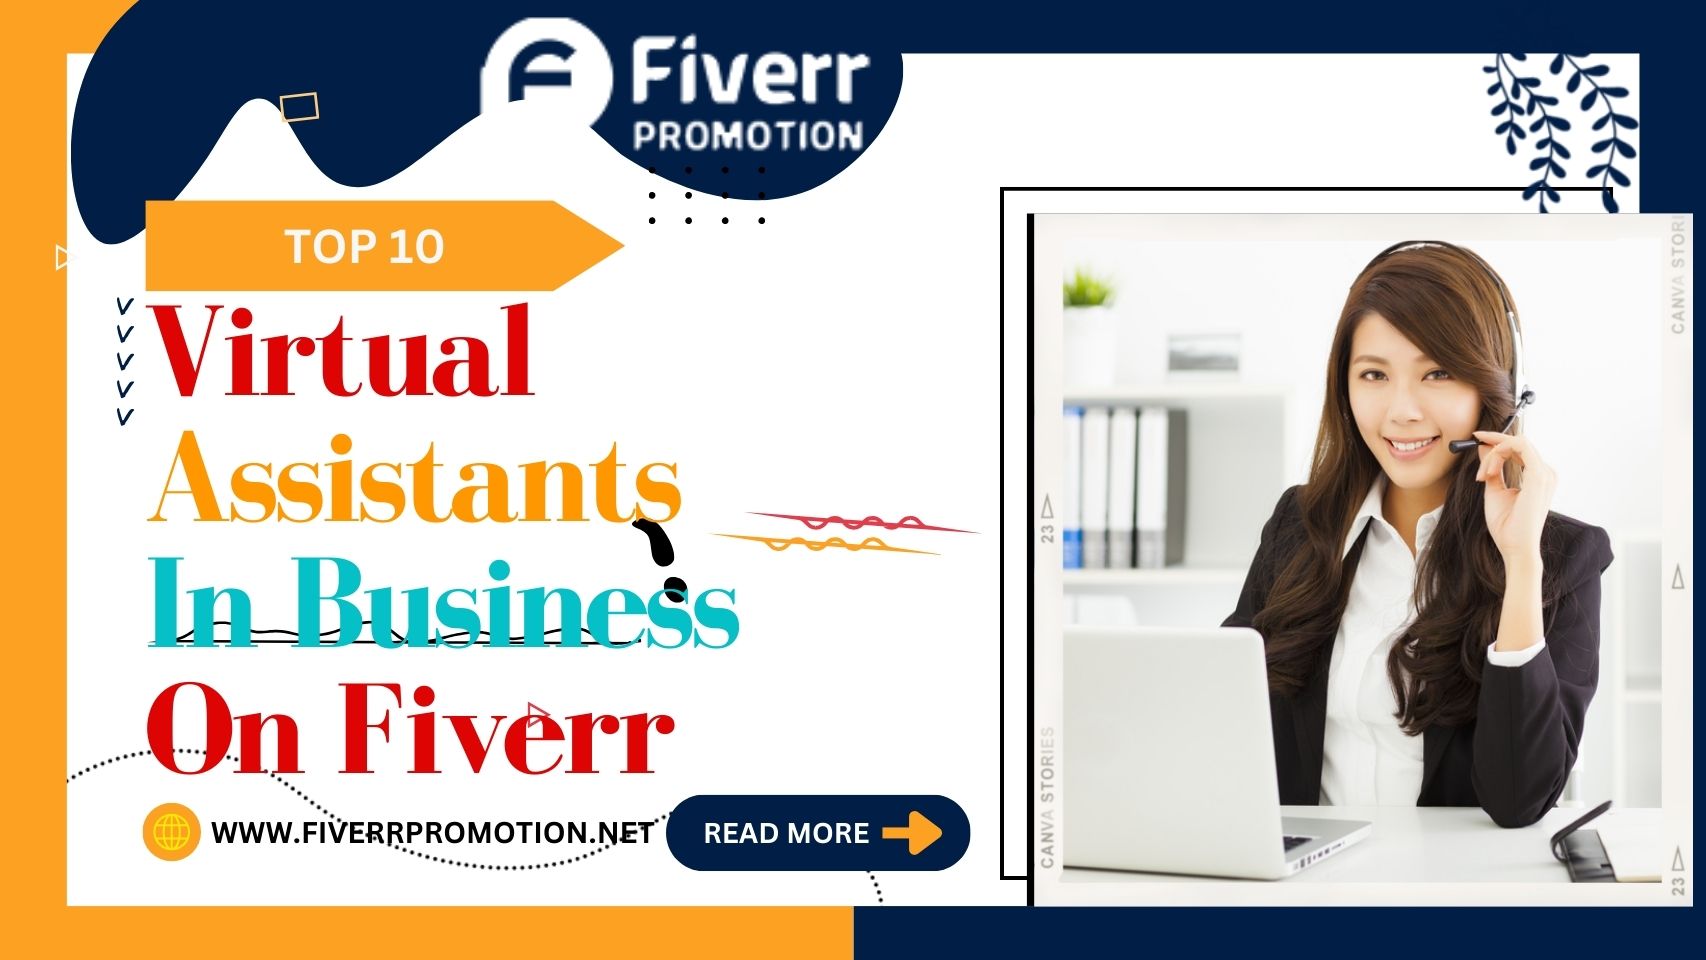 Top 10 Virtual Assistants in Business on Fiverr